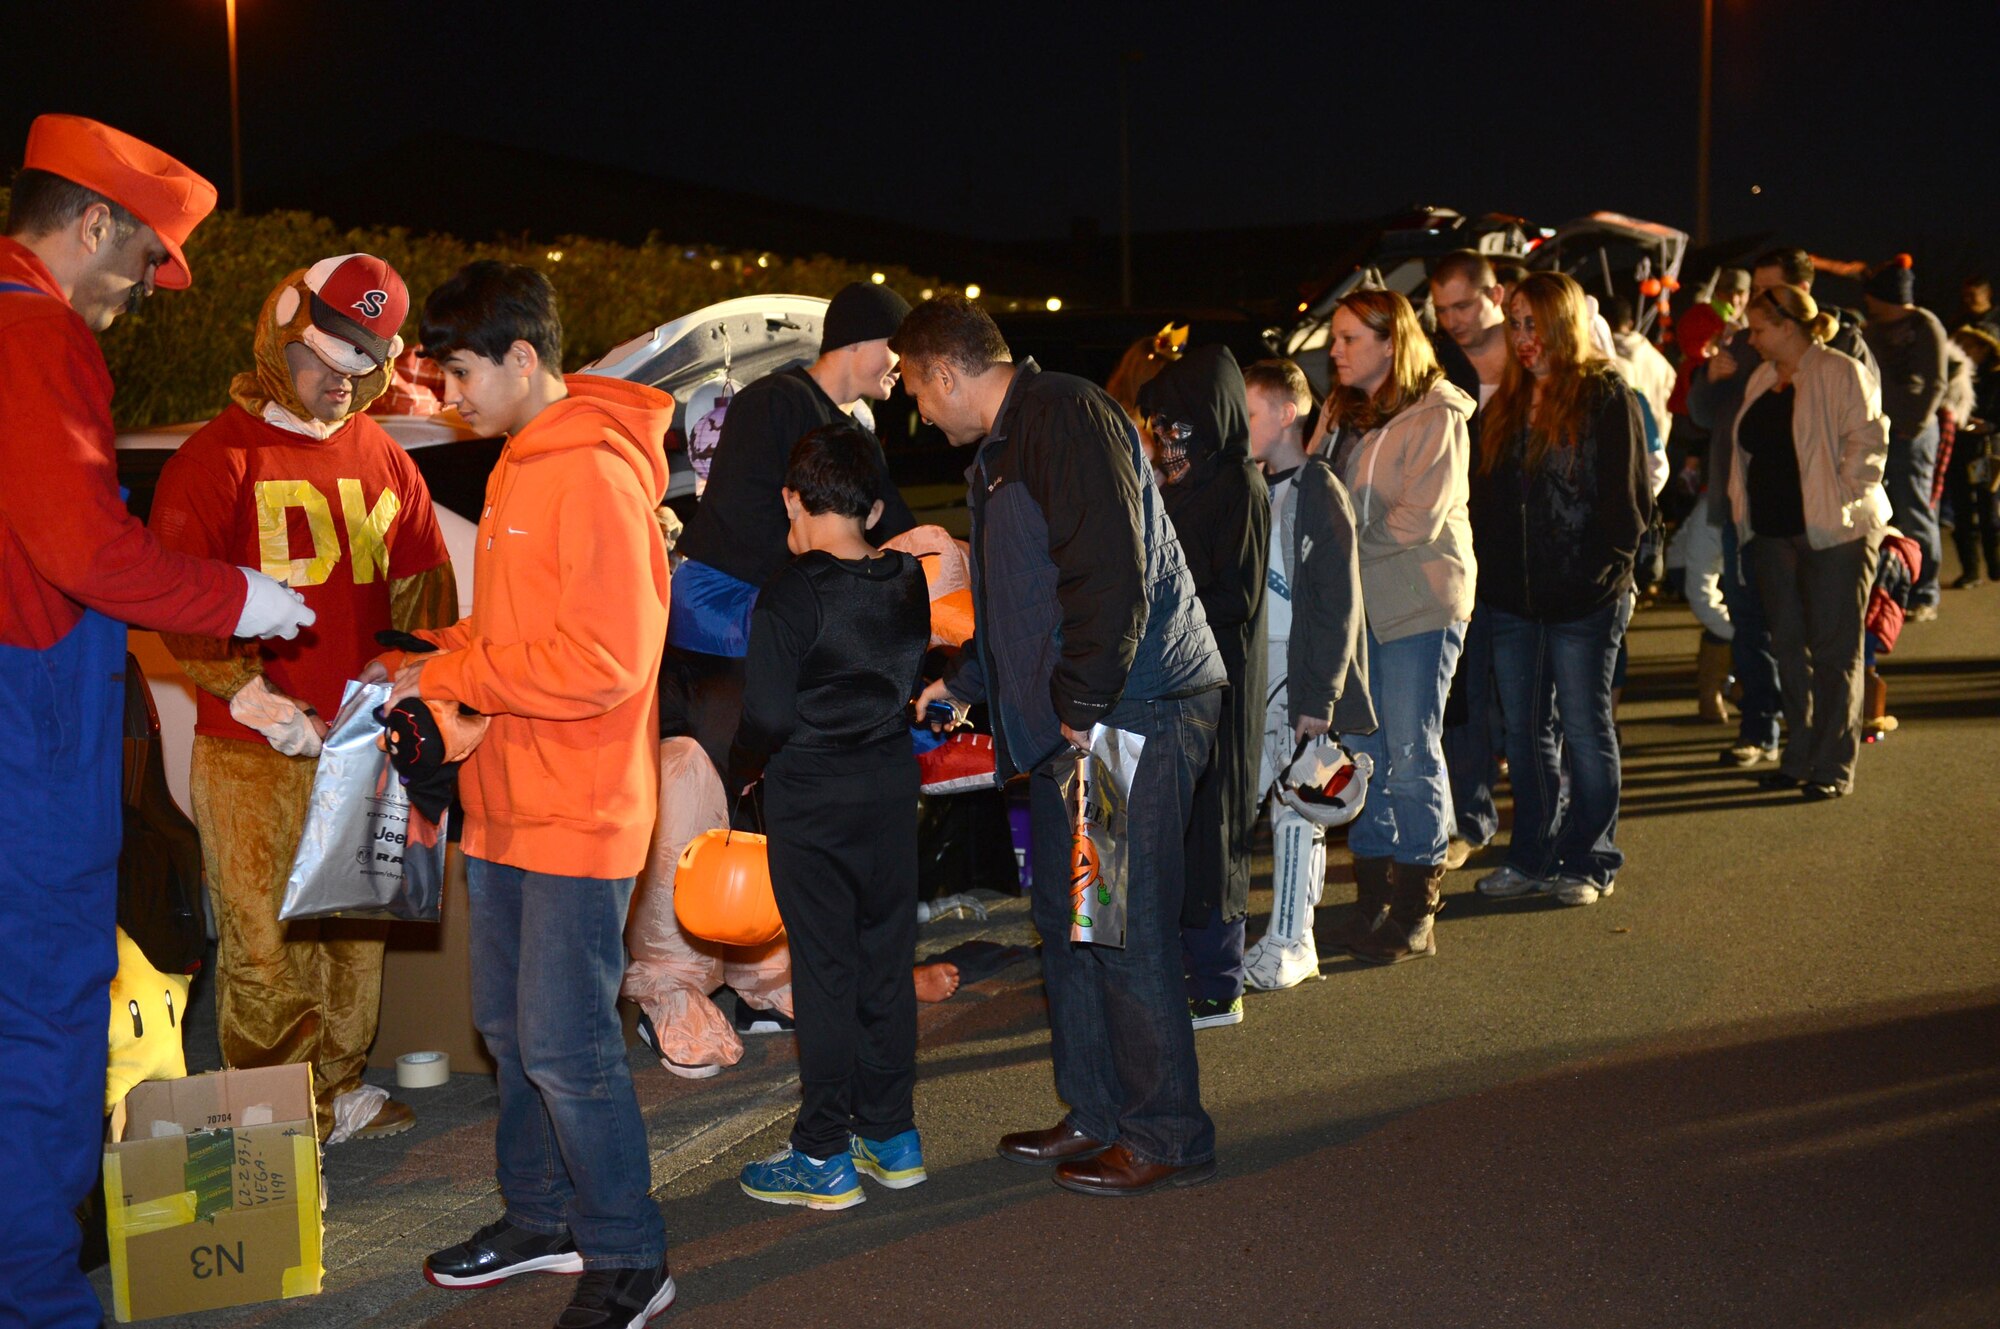 SPANGDAHLEM AIR BASE, Germany – Parents take their children through a parking lot for “trunk or treating” at Club Eifel Oct. 30, 2013. Children were dressed in costumes and walked through the parking lot collecting candy from the community members from their decorated cars’ trunks. (U.S. Air Force photo by Airman 1st Class Kyle Gese/Released)